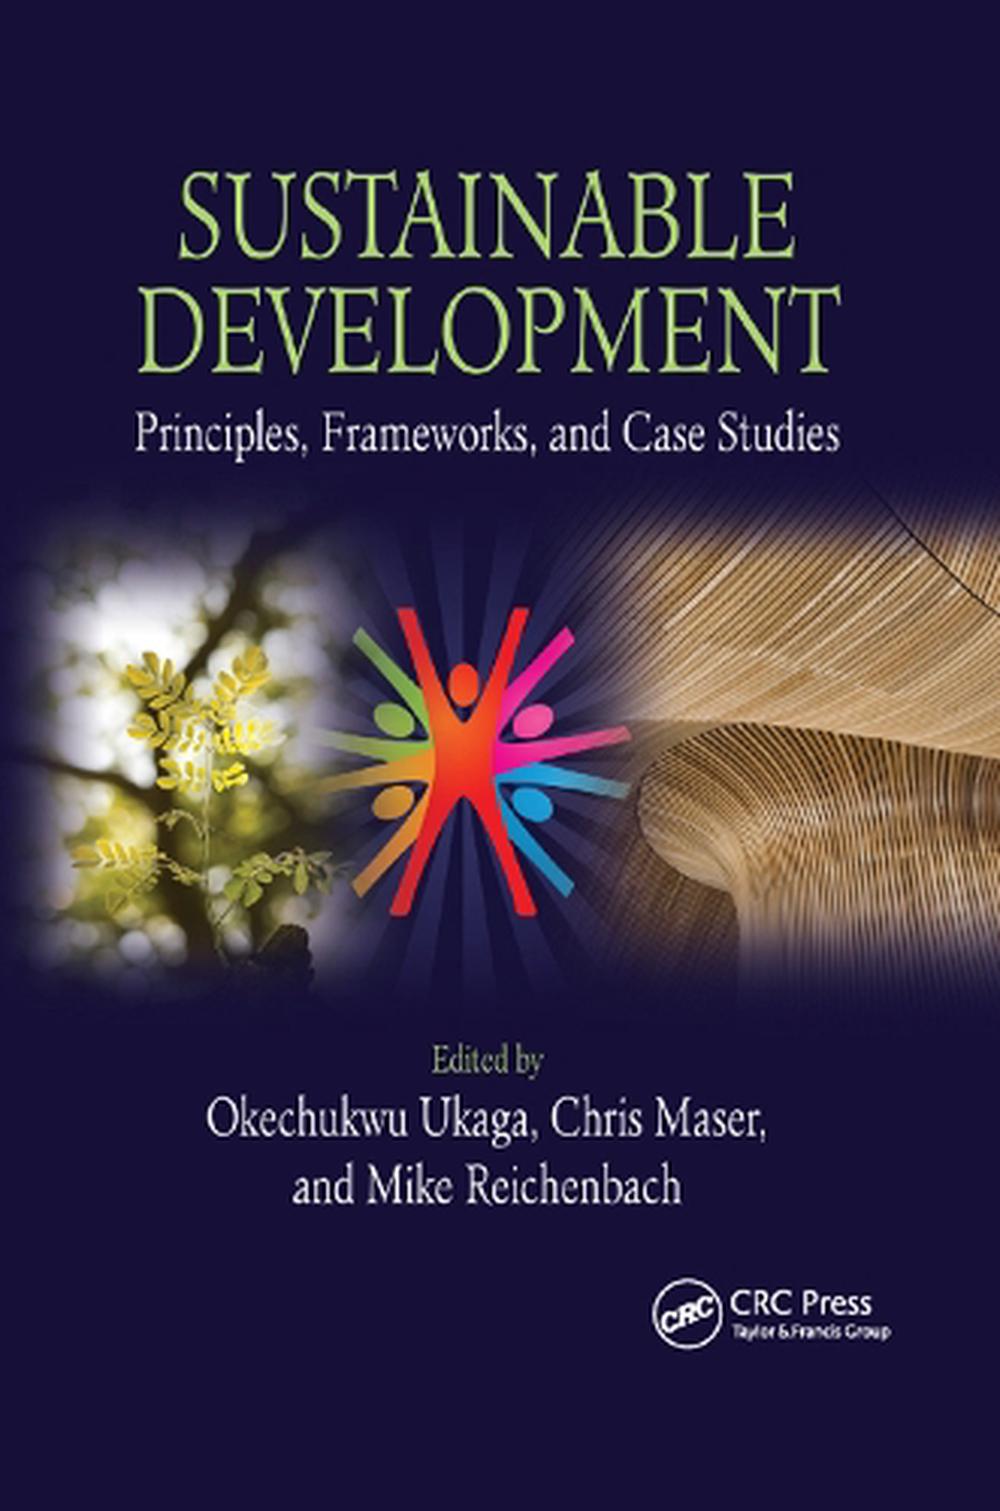 case study related to sustainable development